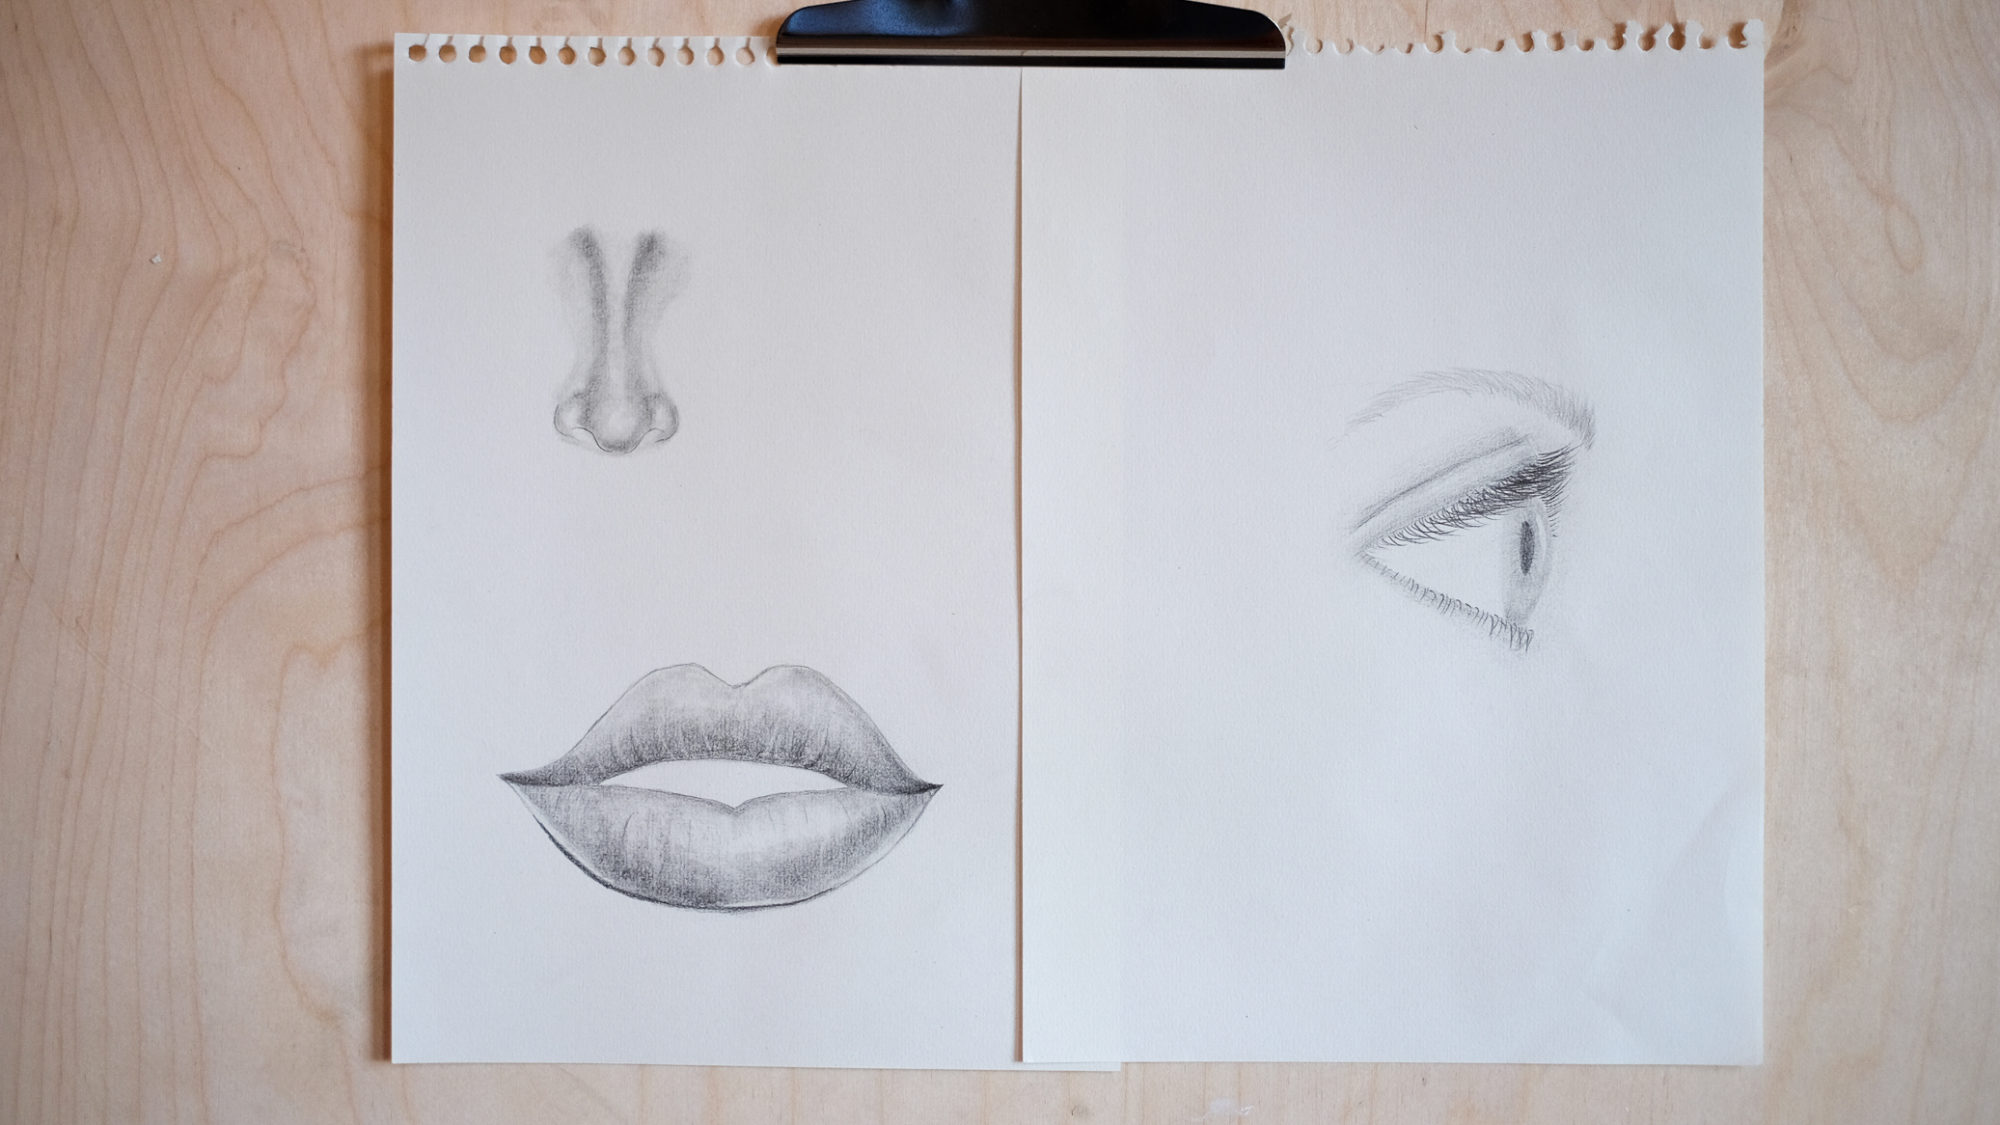 Eyes have quickly grown to become one of my favourite things to sketch :  r/sketches